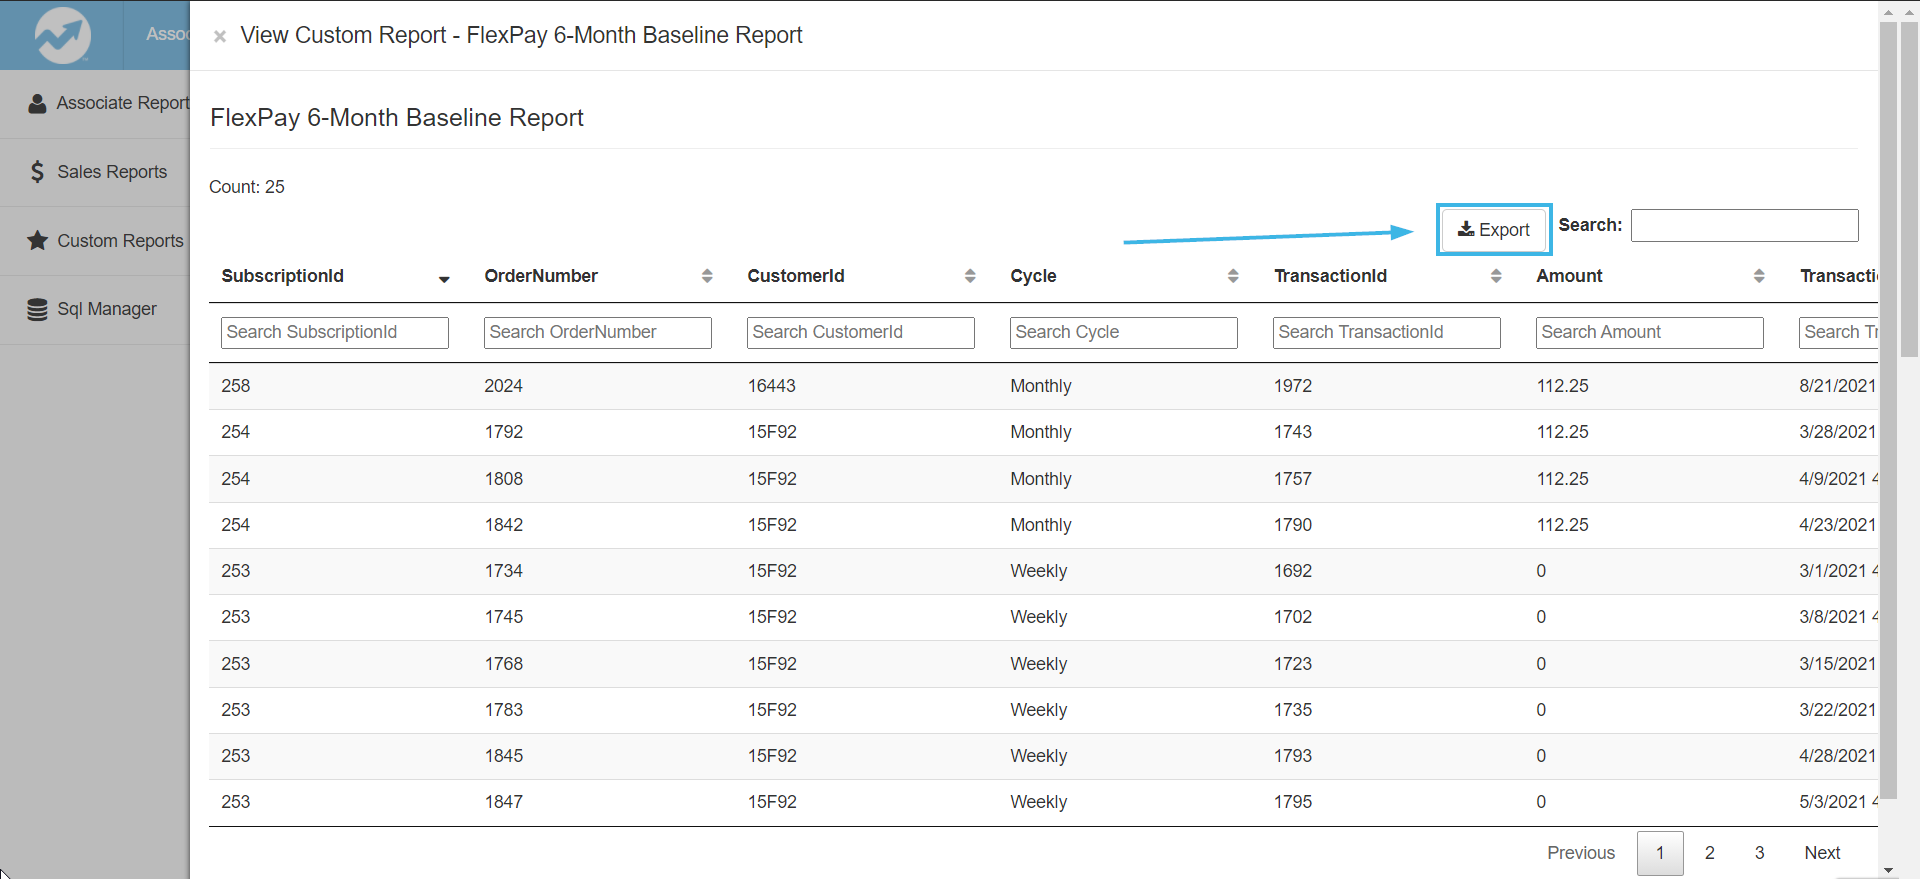 Export the report to a CSV file